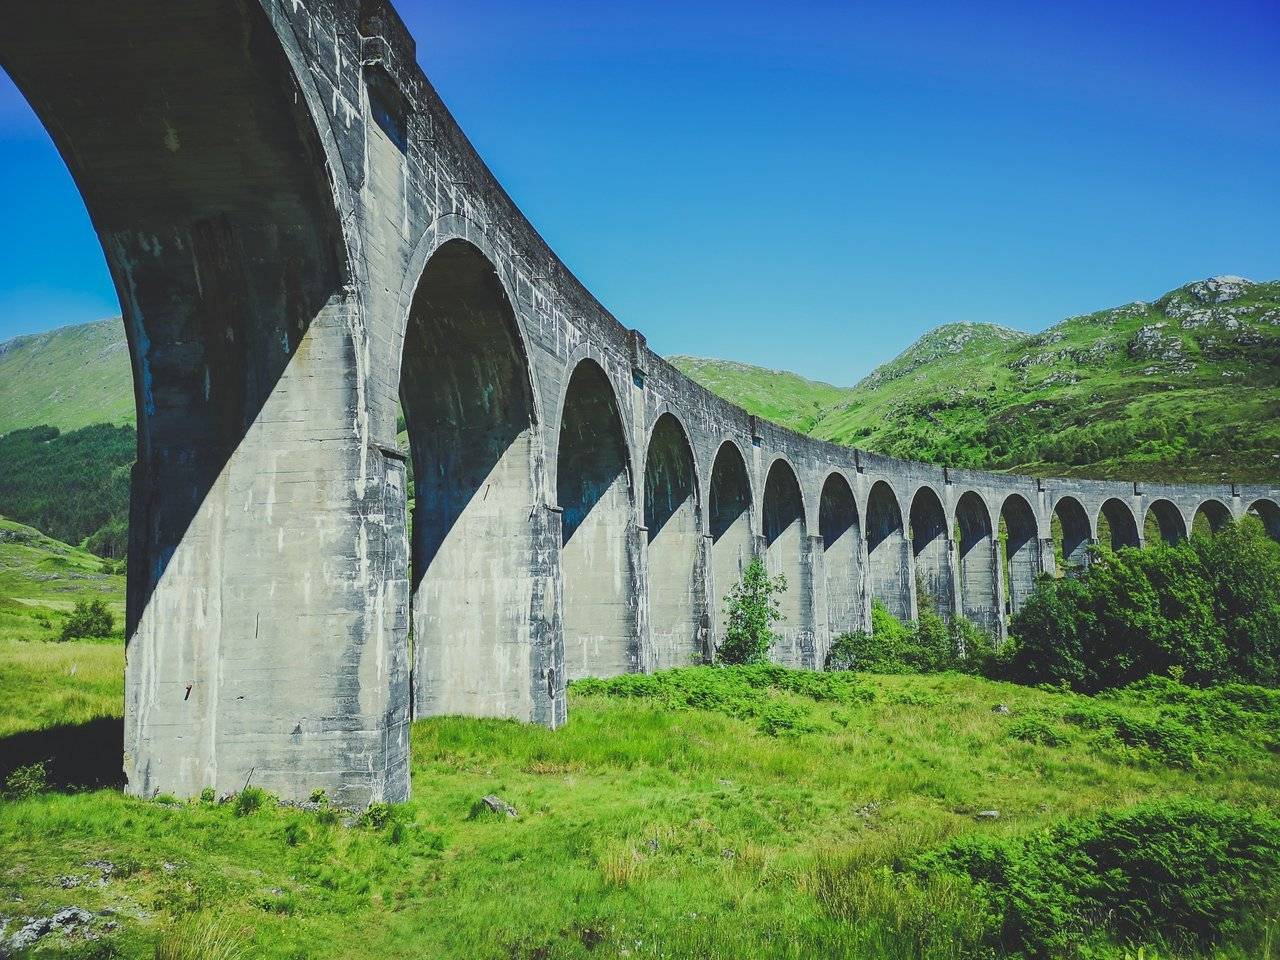   Glenfinnan Viaduct from below on a sunny summer day, Scotland. Photo by Alis Monte [CC BY-SA 4.0], via Connecting the Dots